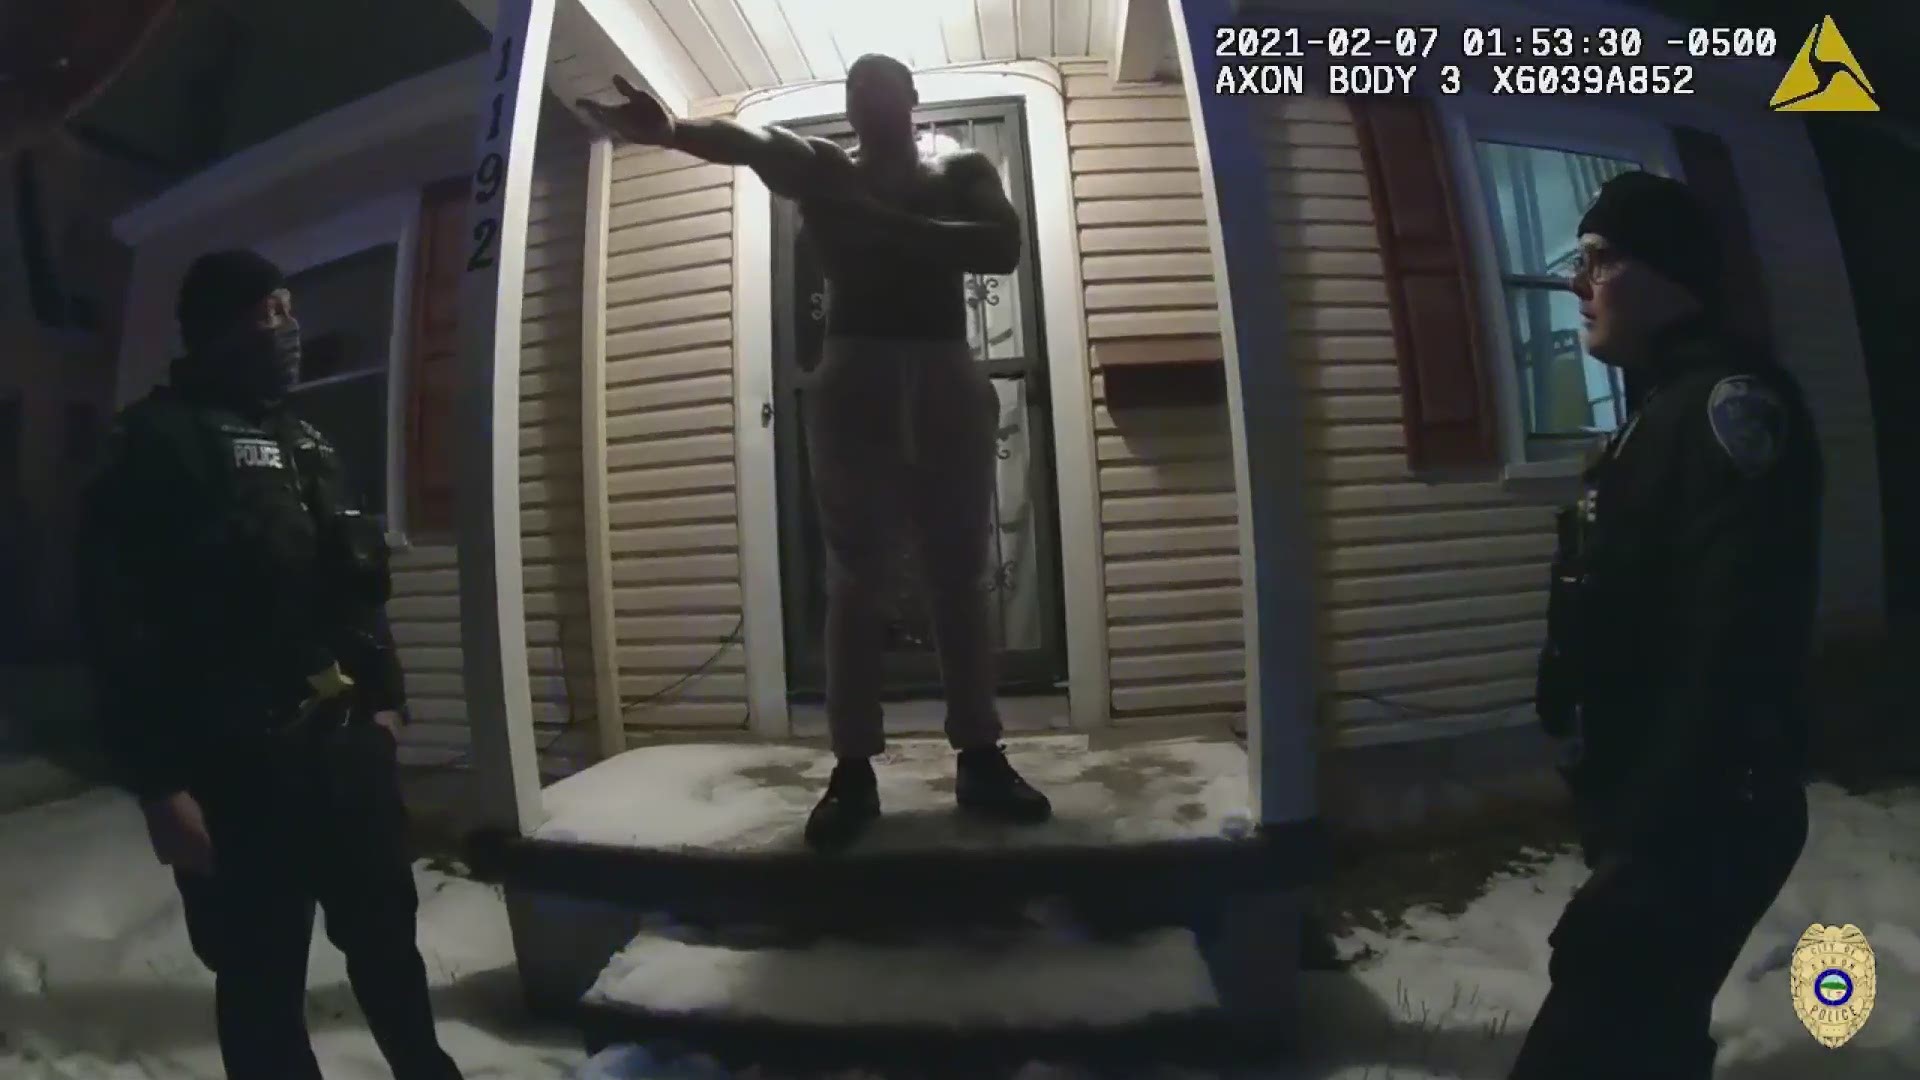 Bodycam Video Akron Police Officer Resigns Amid Use Of Force Investigation Into Arrest Tactic